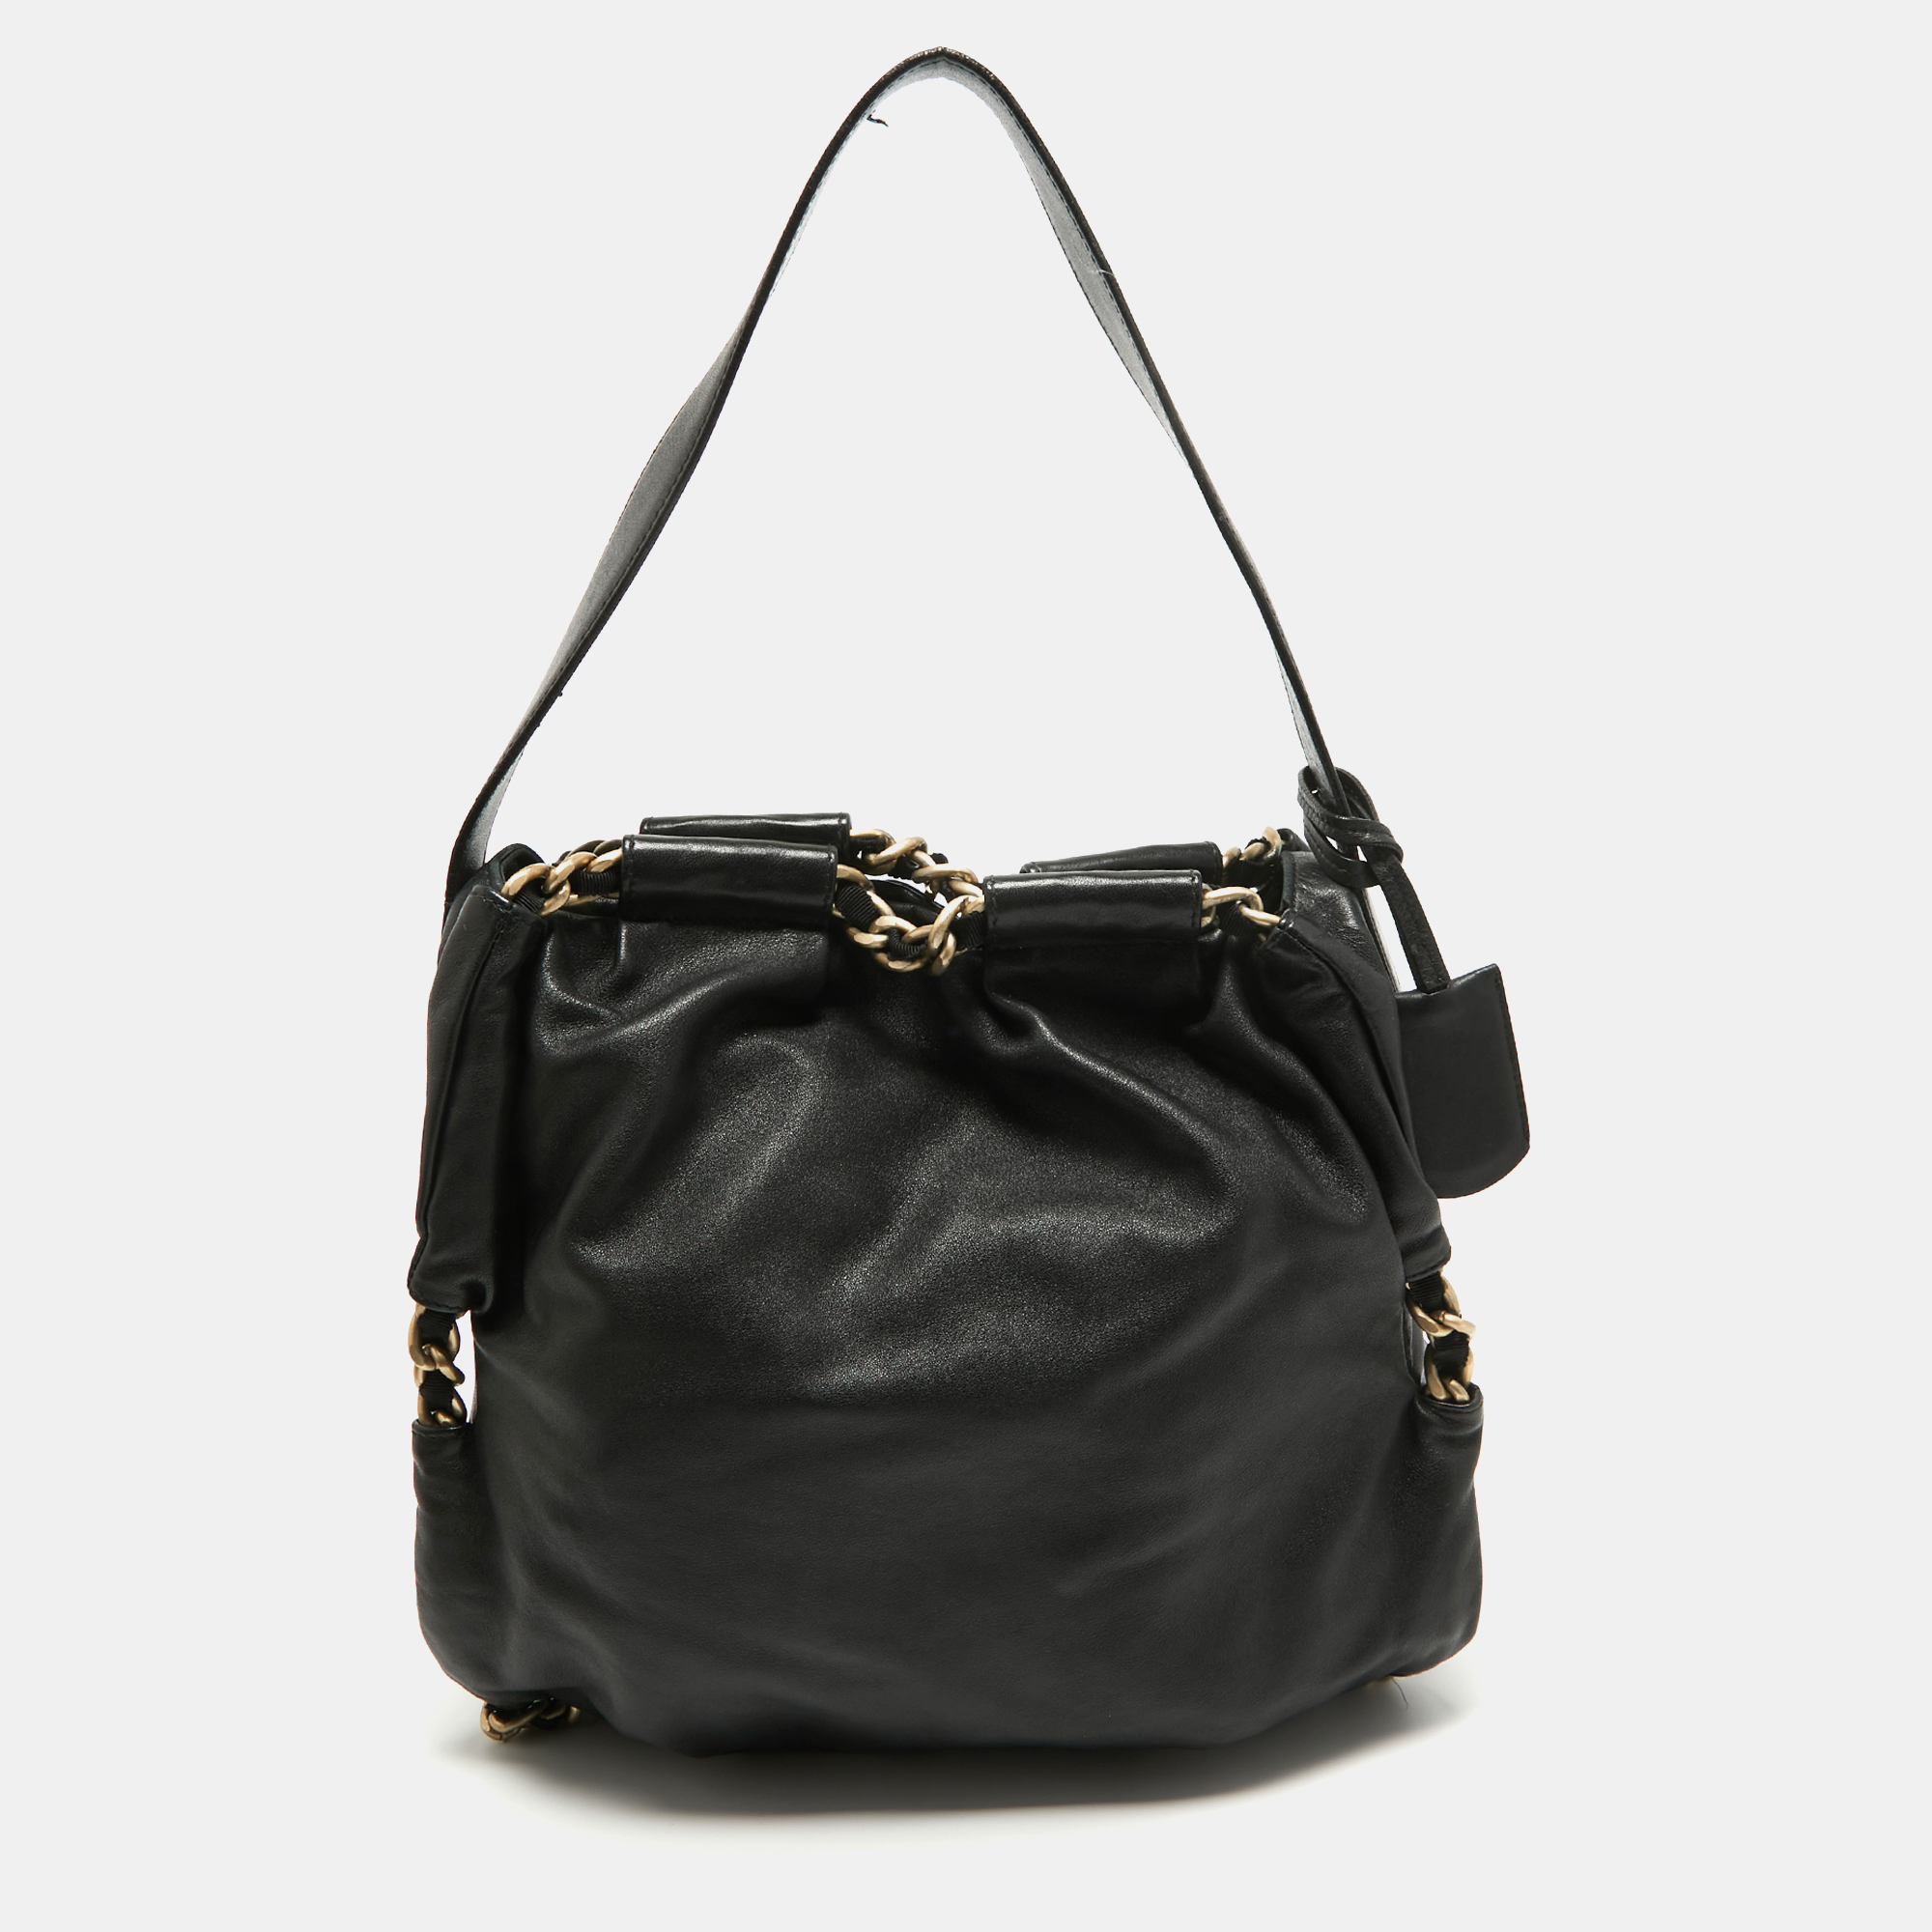 Pre-owned Furla Black Leather Chain Detail Hobo